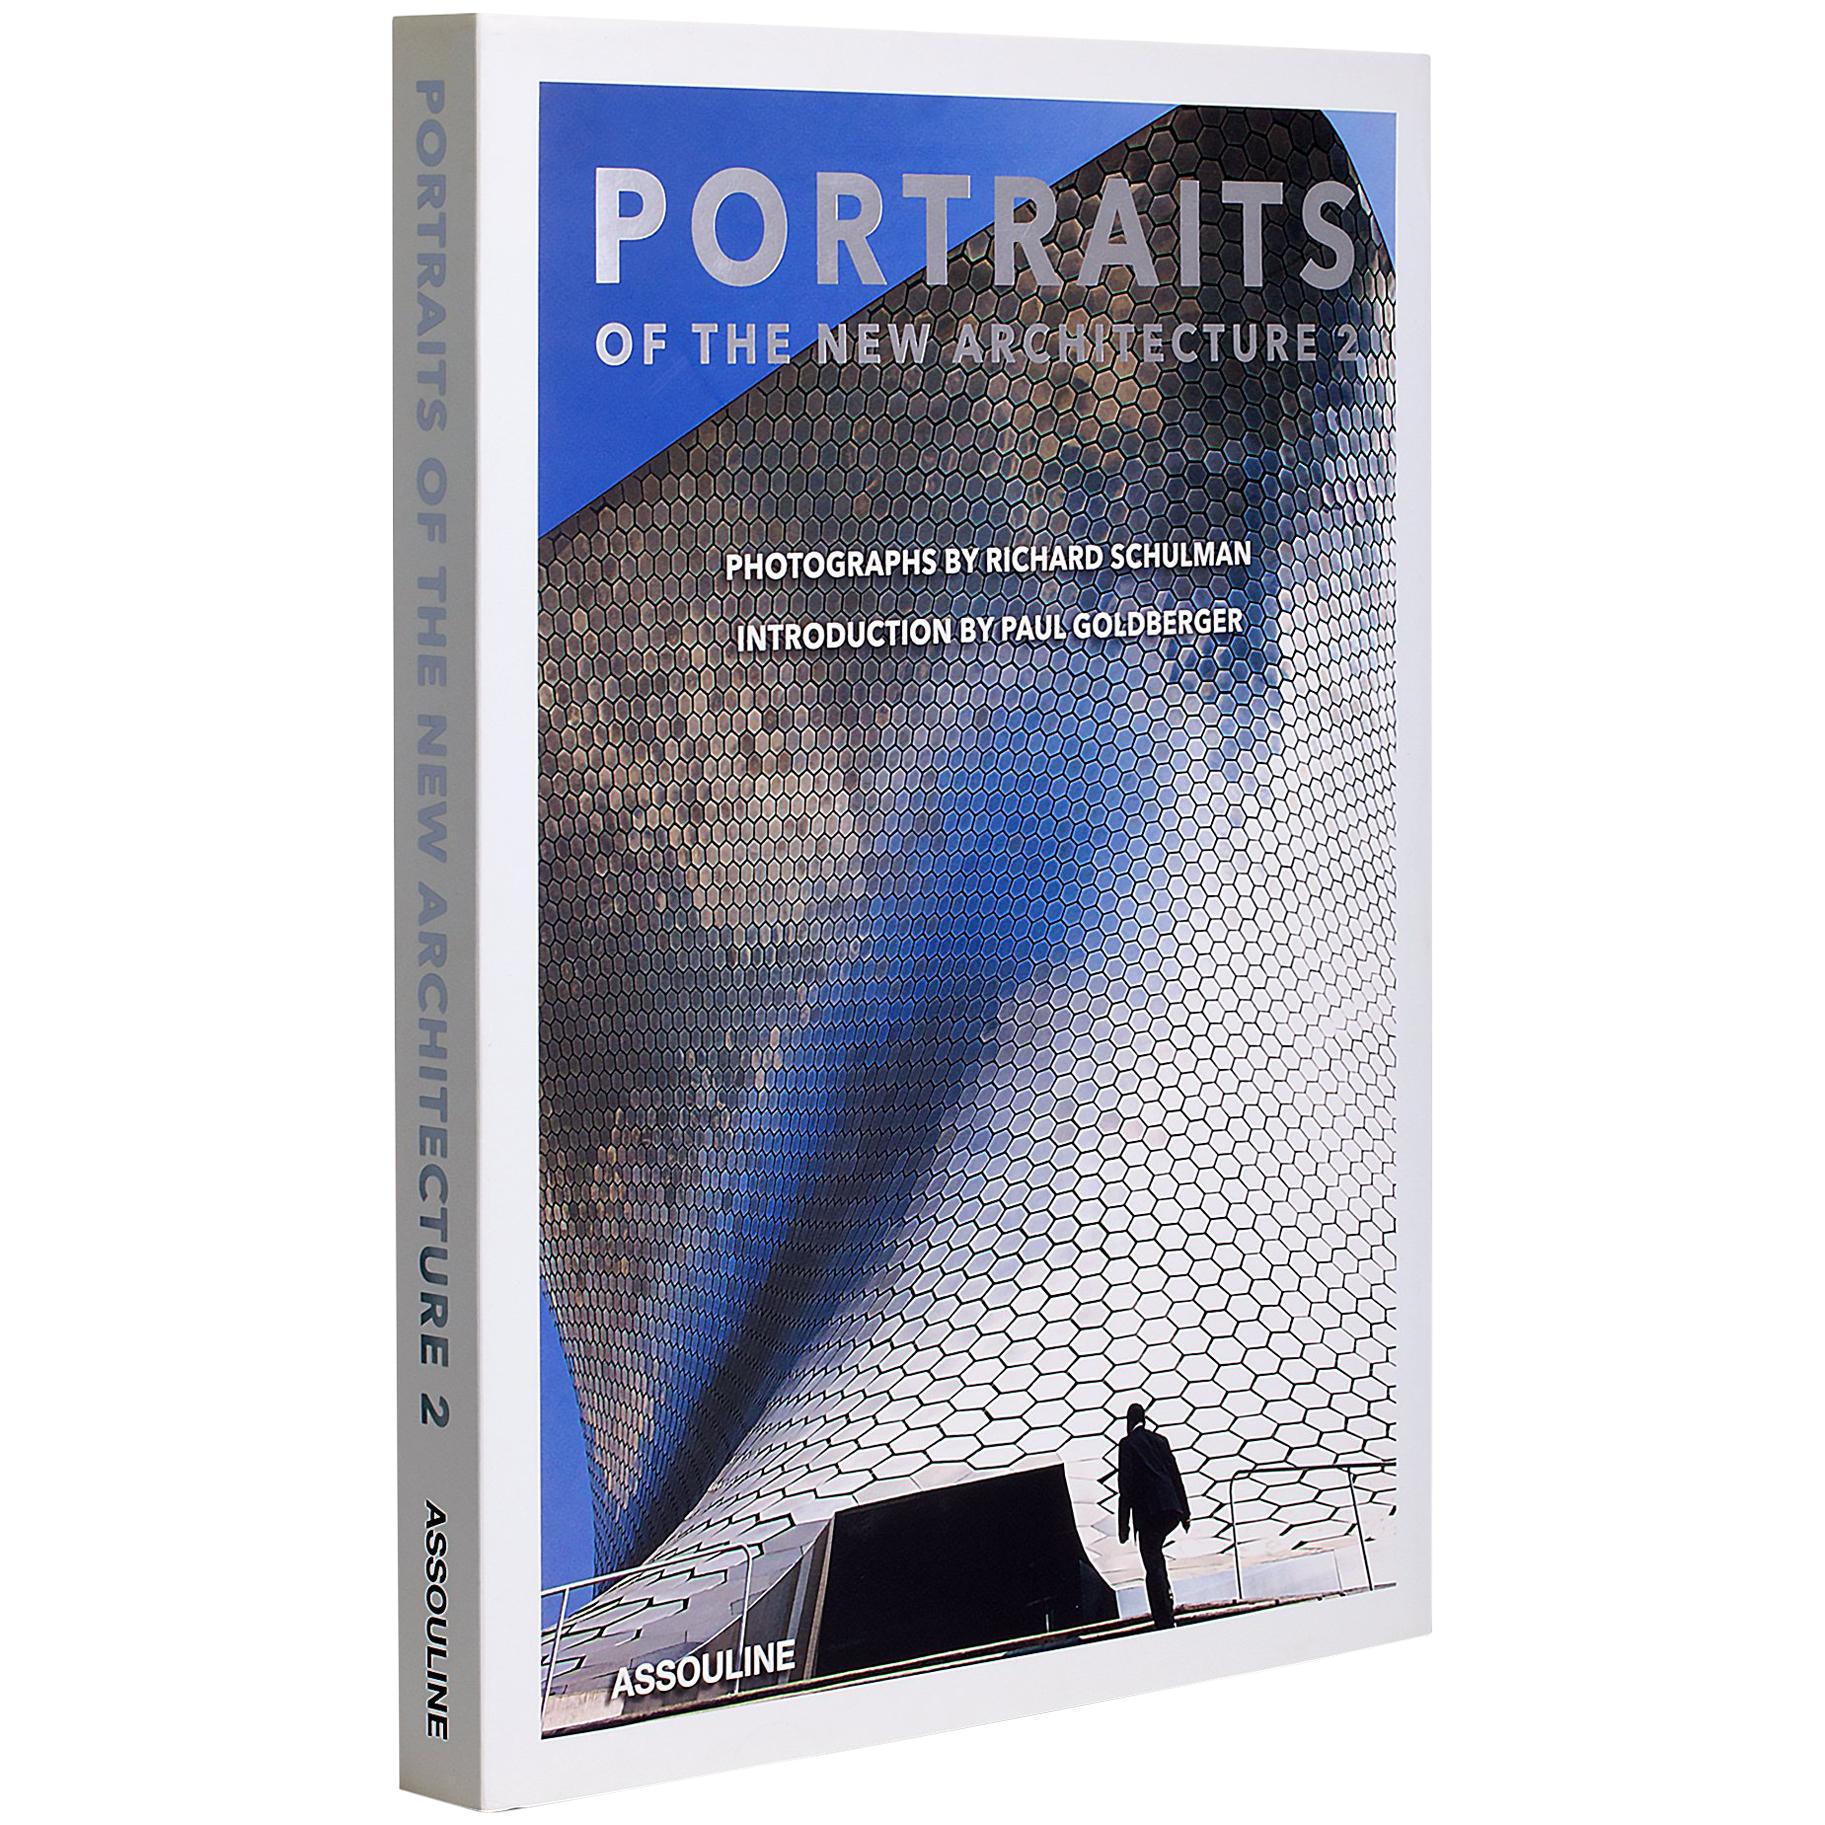 "Portraits of the New Architecture 2" Book